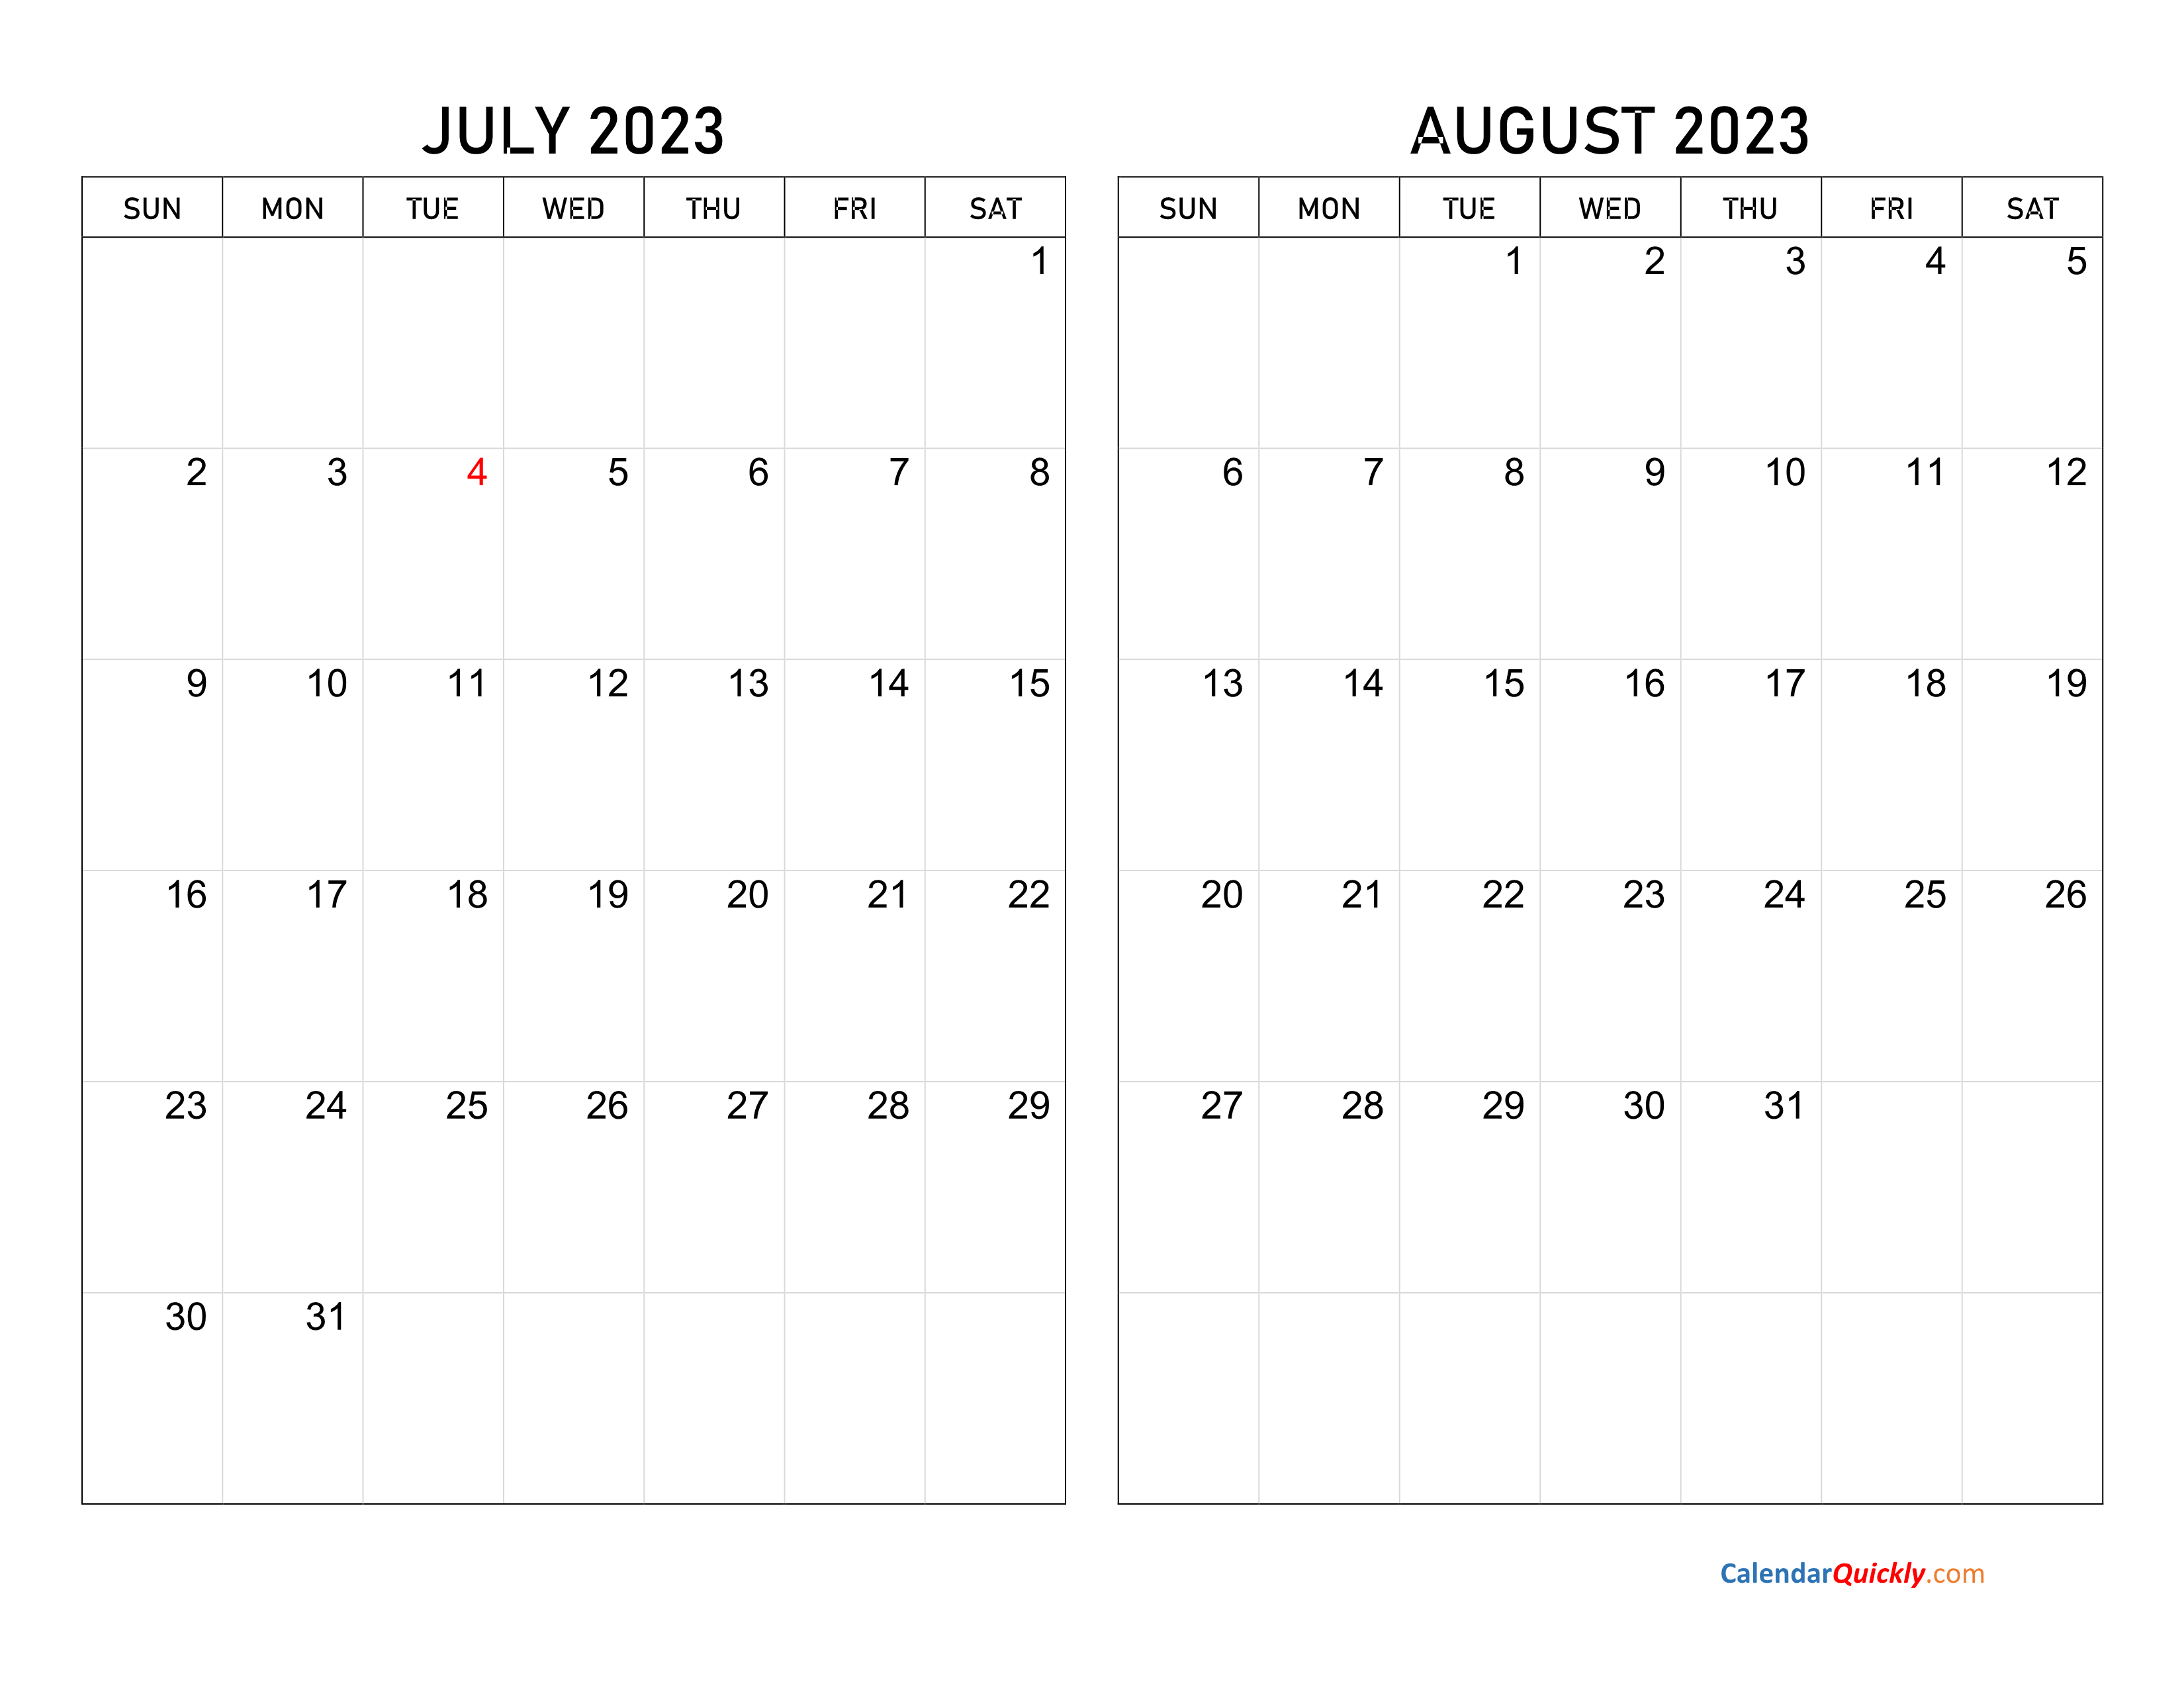 august-2023-free-calendar-printable-july-and-august-2023-calendar-calendar-quickly-printable